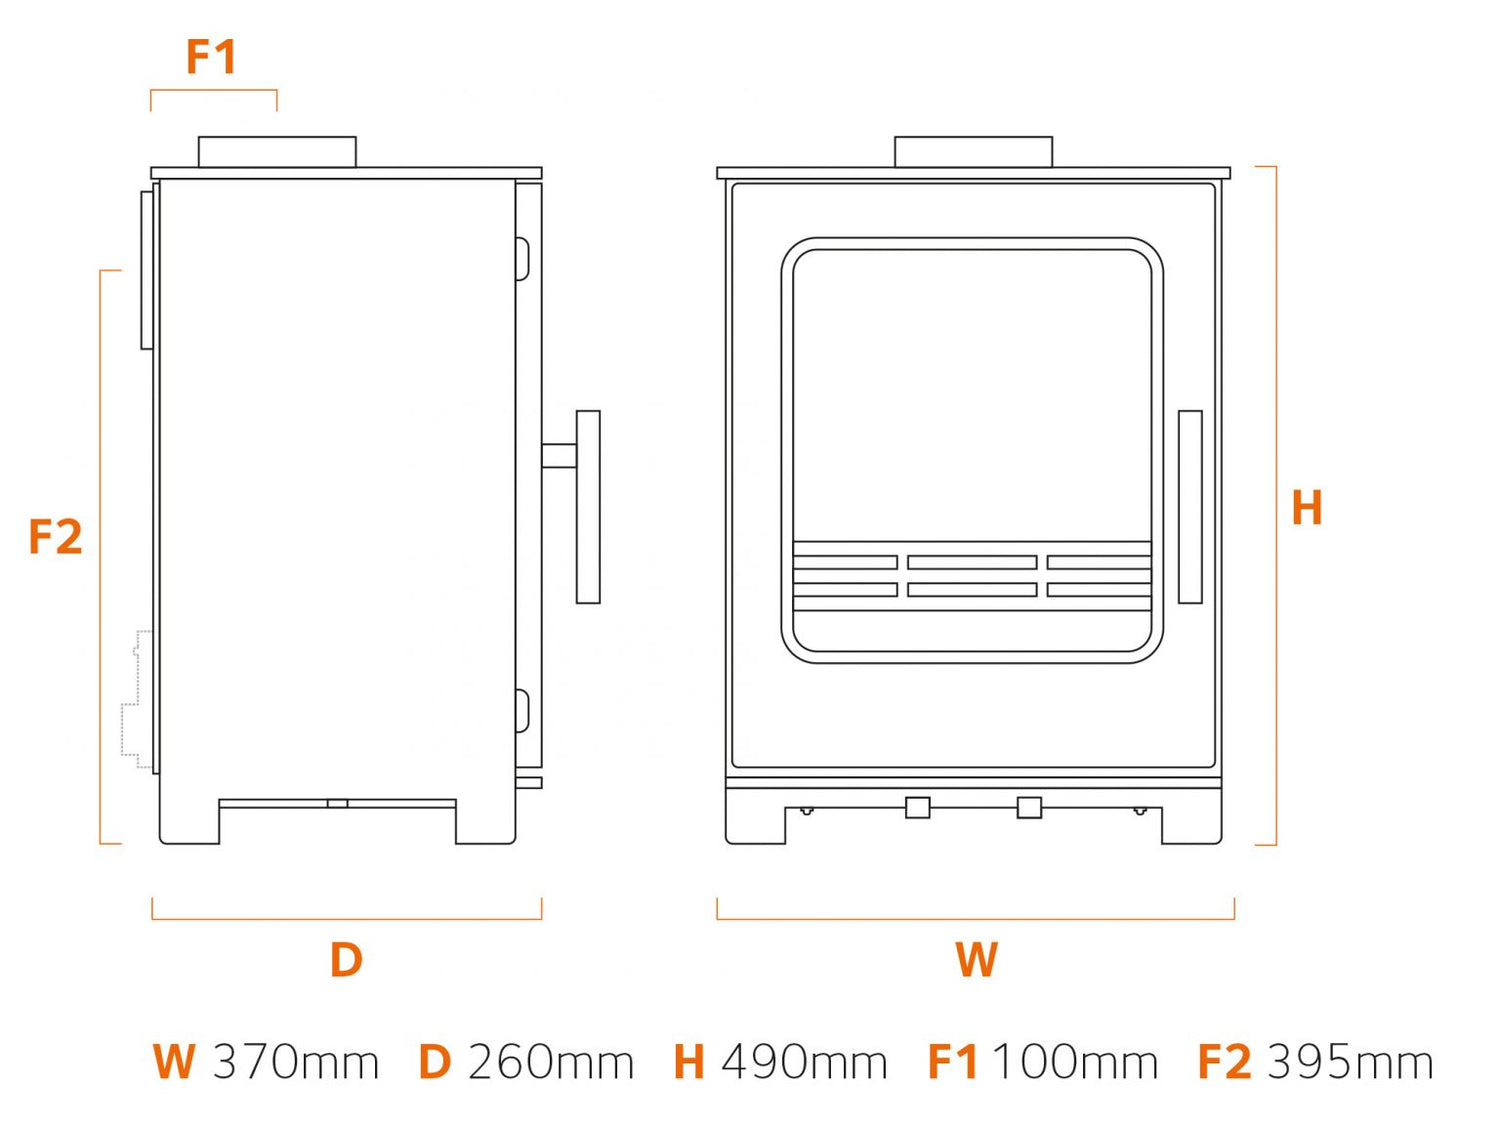 Dimensions and specifications for the Buddy 4 Multifuel stove.